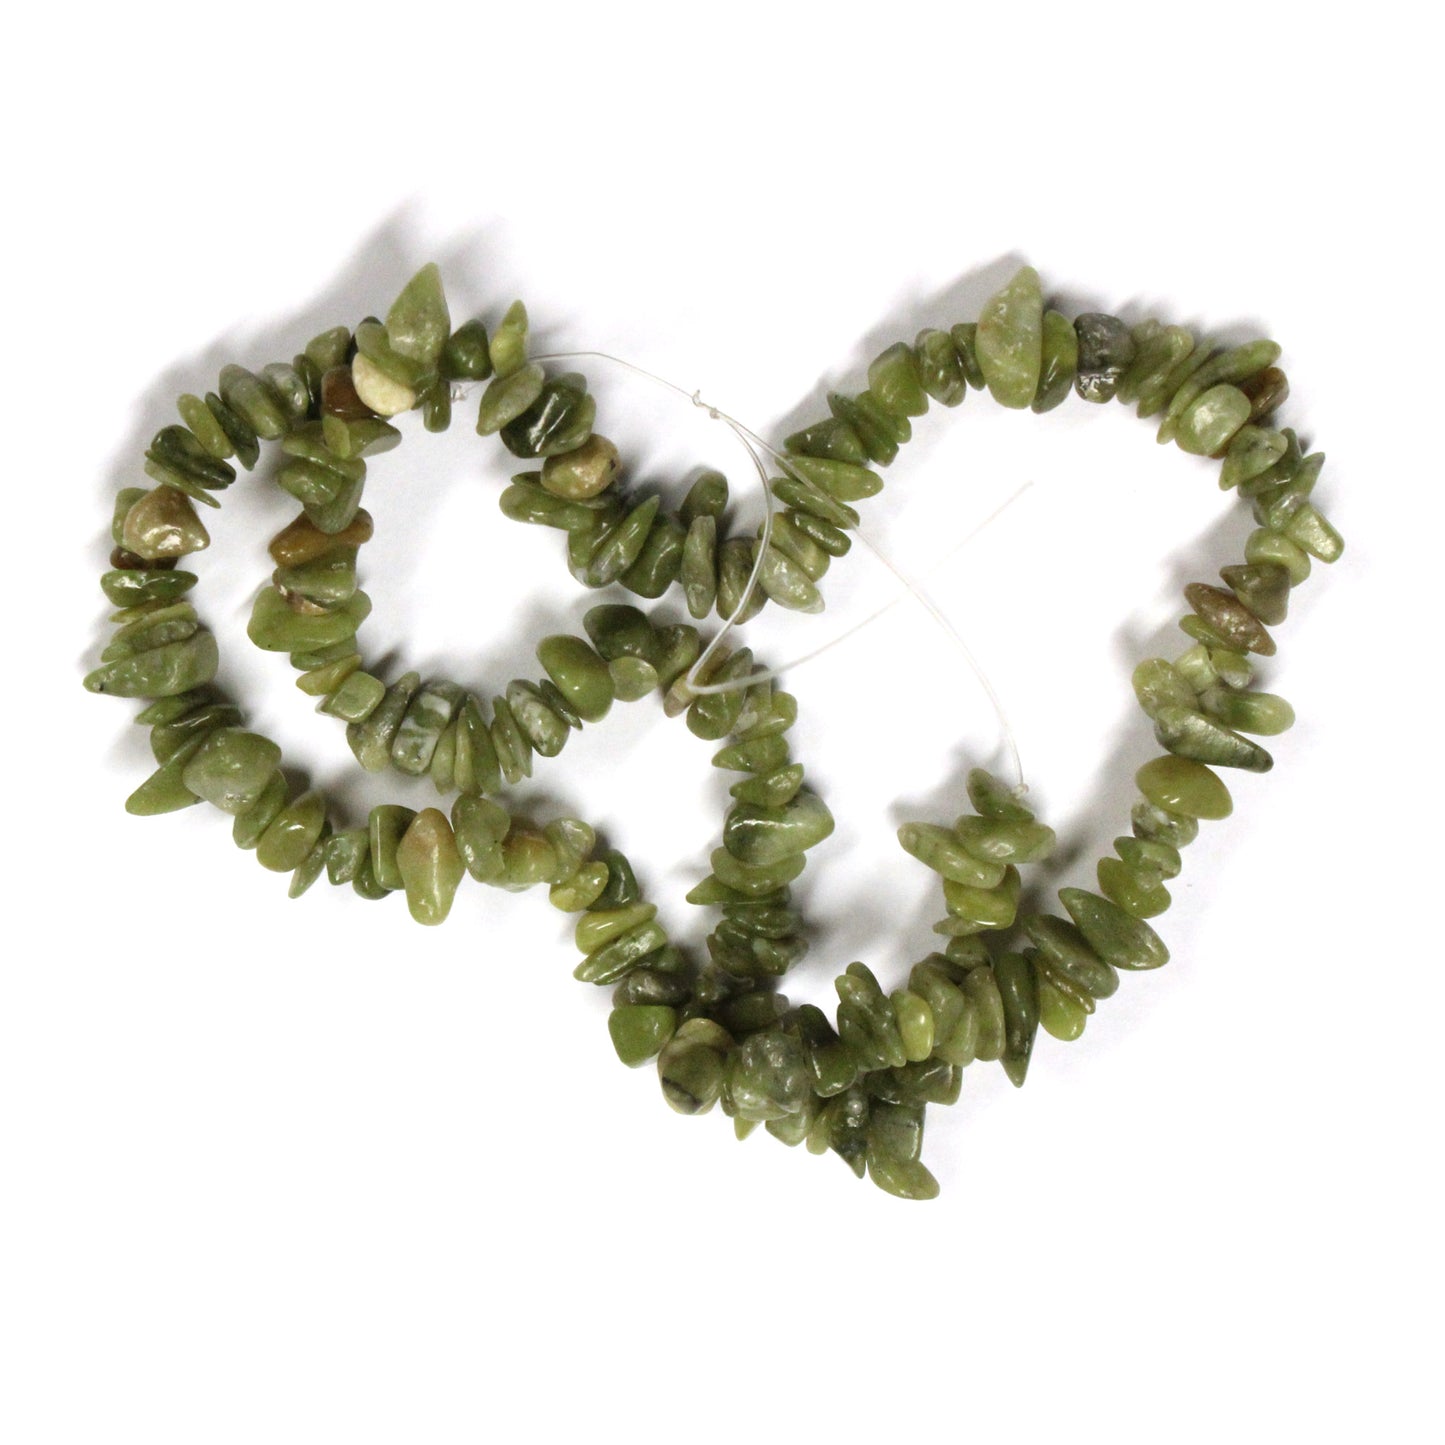 Nephrite Jade Chip Beads / 16 Inch strand / 5-12 chips / natural opaque stone